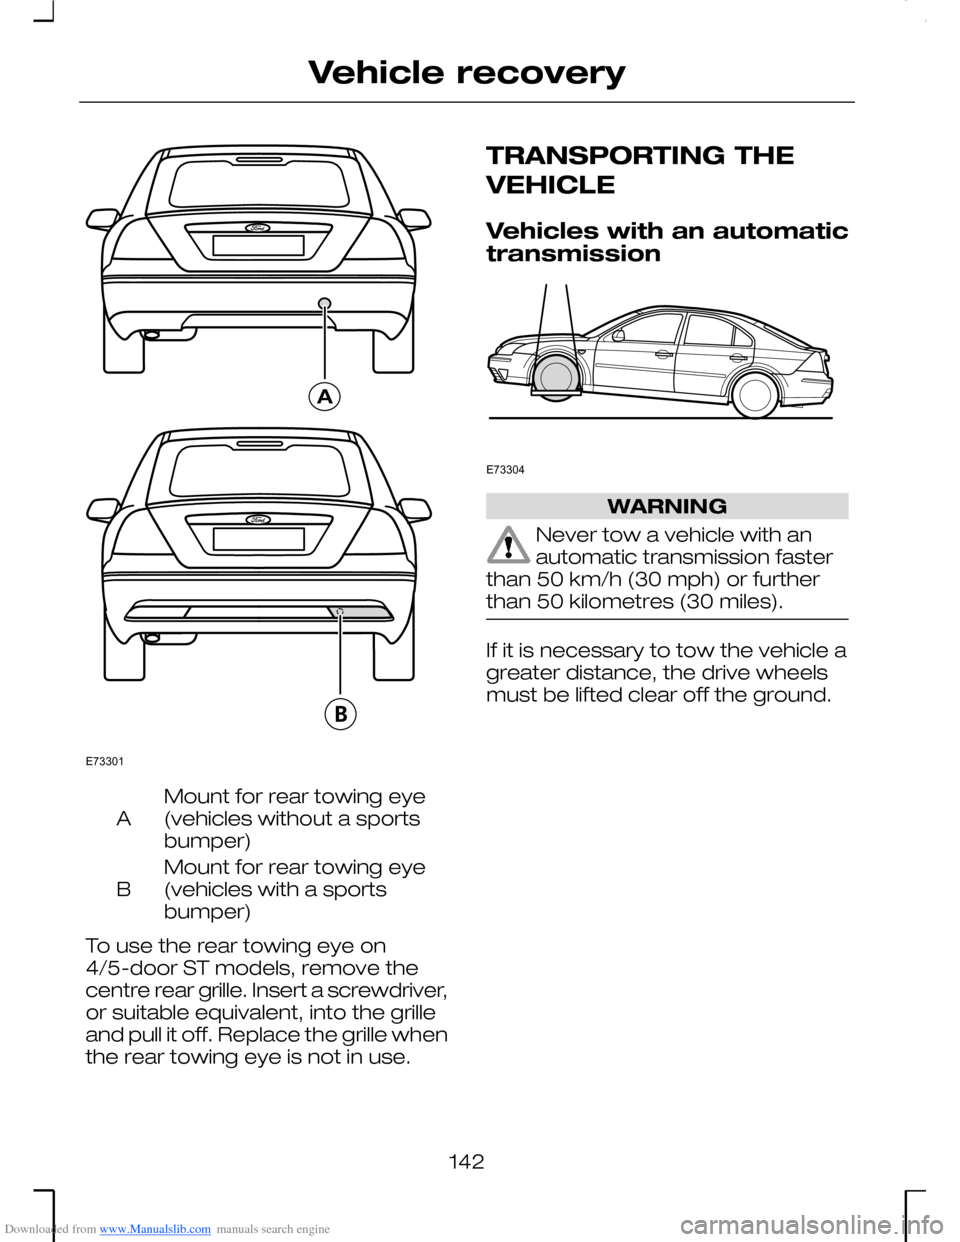 FORD MONDEO 2006 2.G Owners Manual Downloaded from www.Manualslib.com manuals search engine Mount for rear towing eye(vehicles without a sportsbumper)A
Mount for rear towing eye(vehicles with a sportsbumper)B
To use the rear towing eye